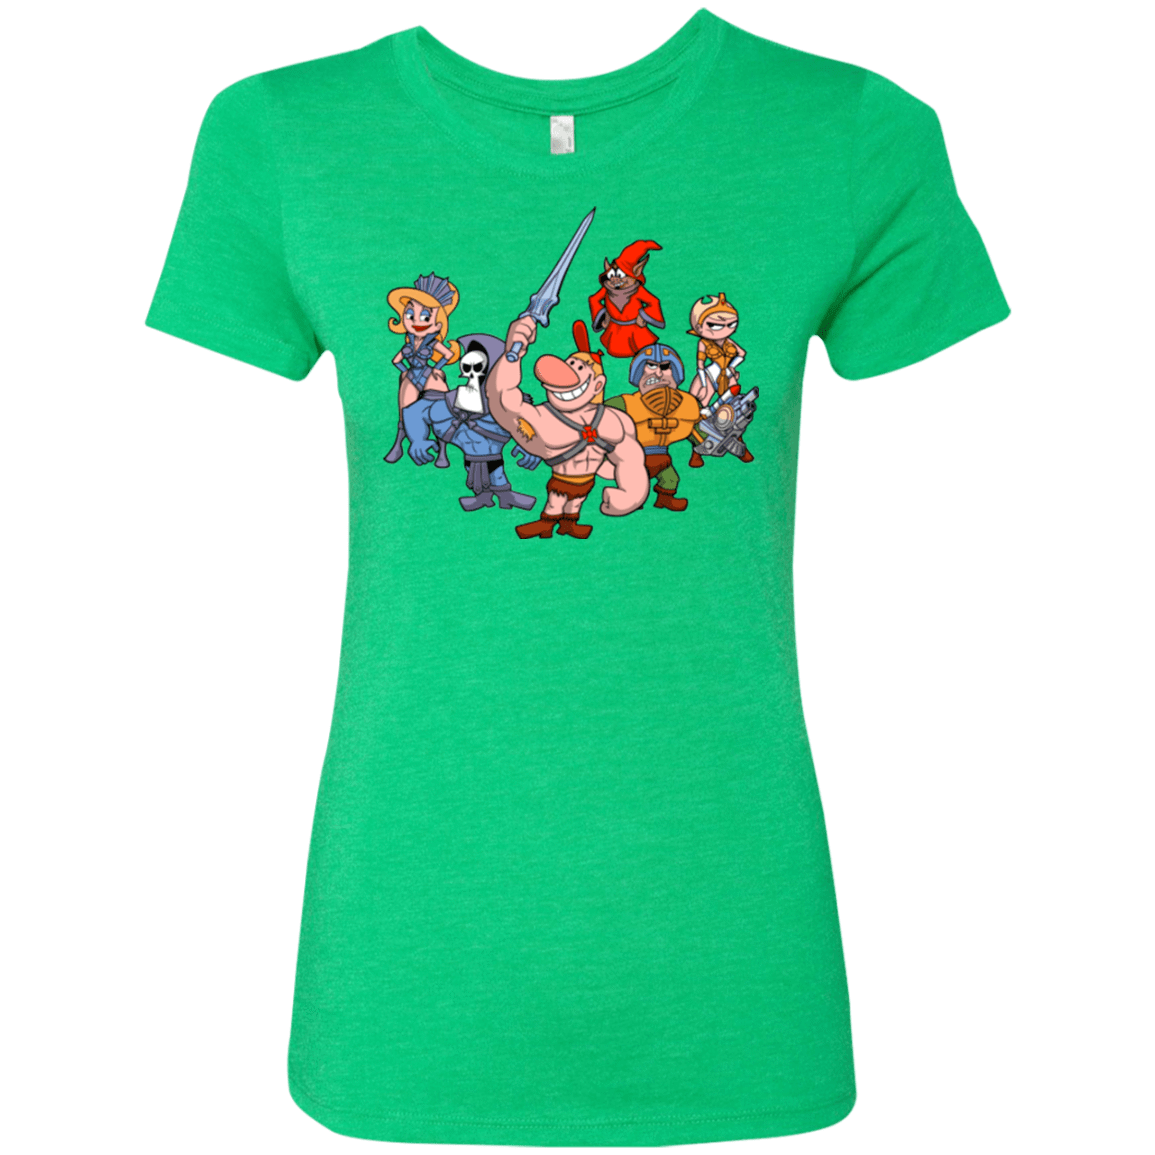 T-Shirts Envy / Small Masters of the Grimverse Women's Triblend T-Shirt